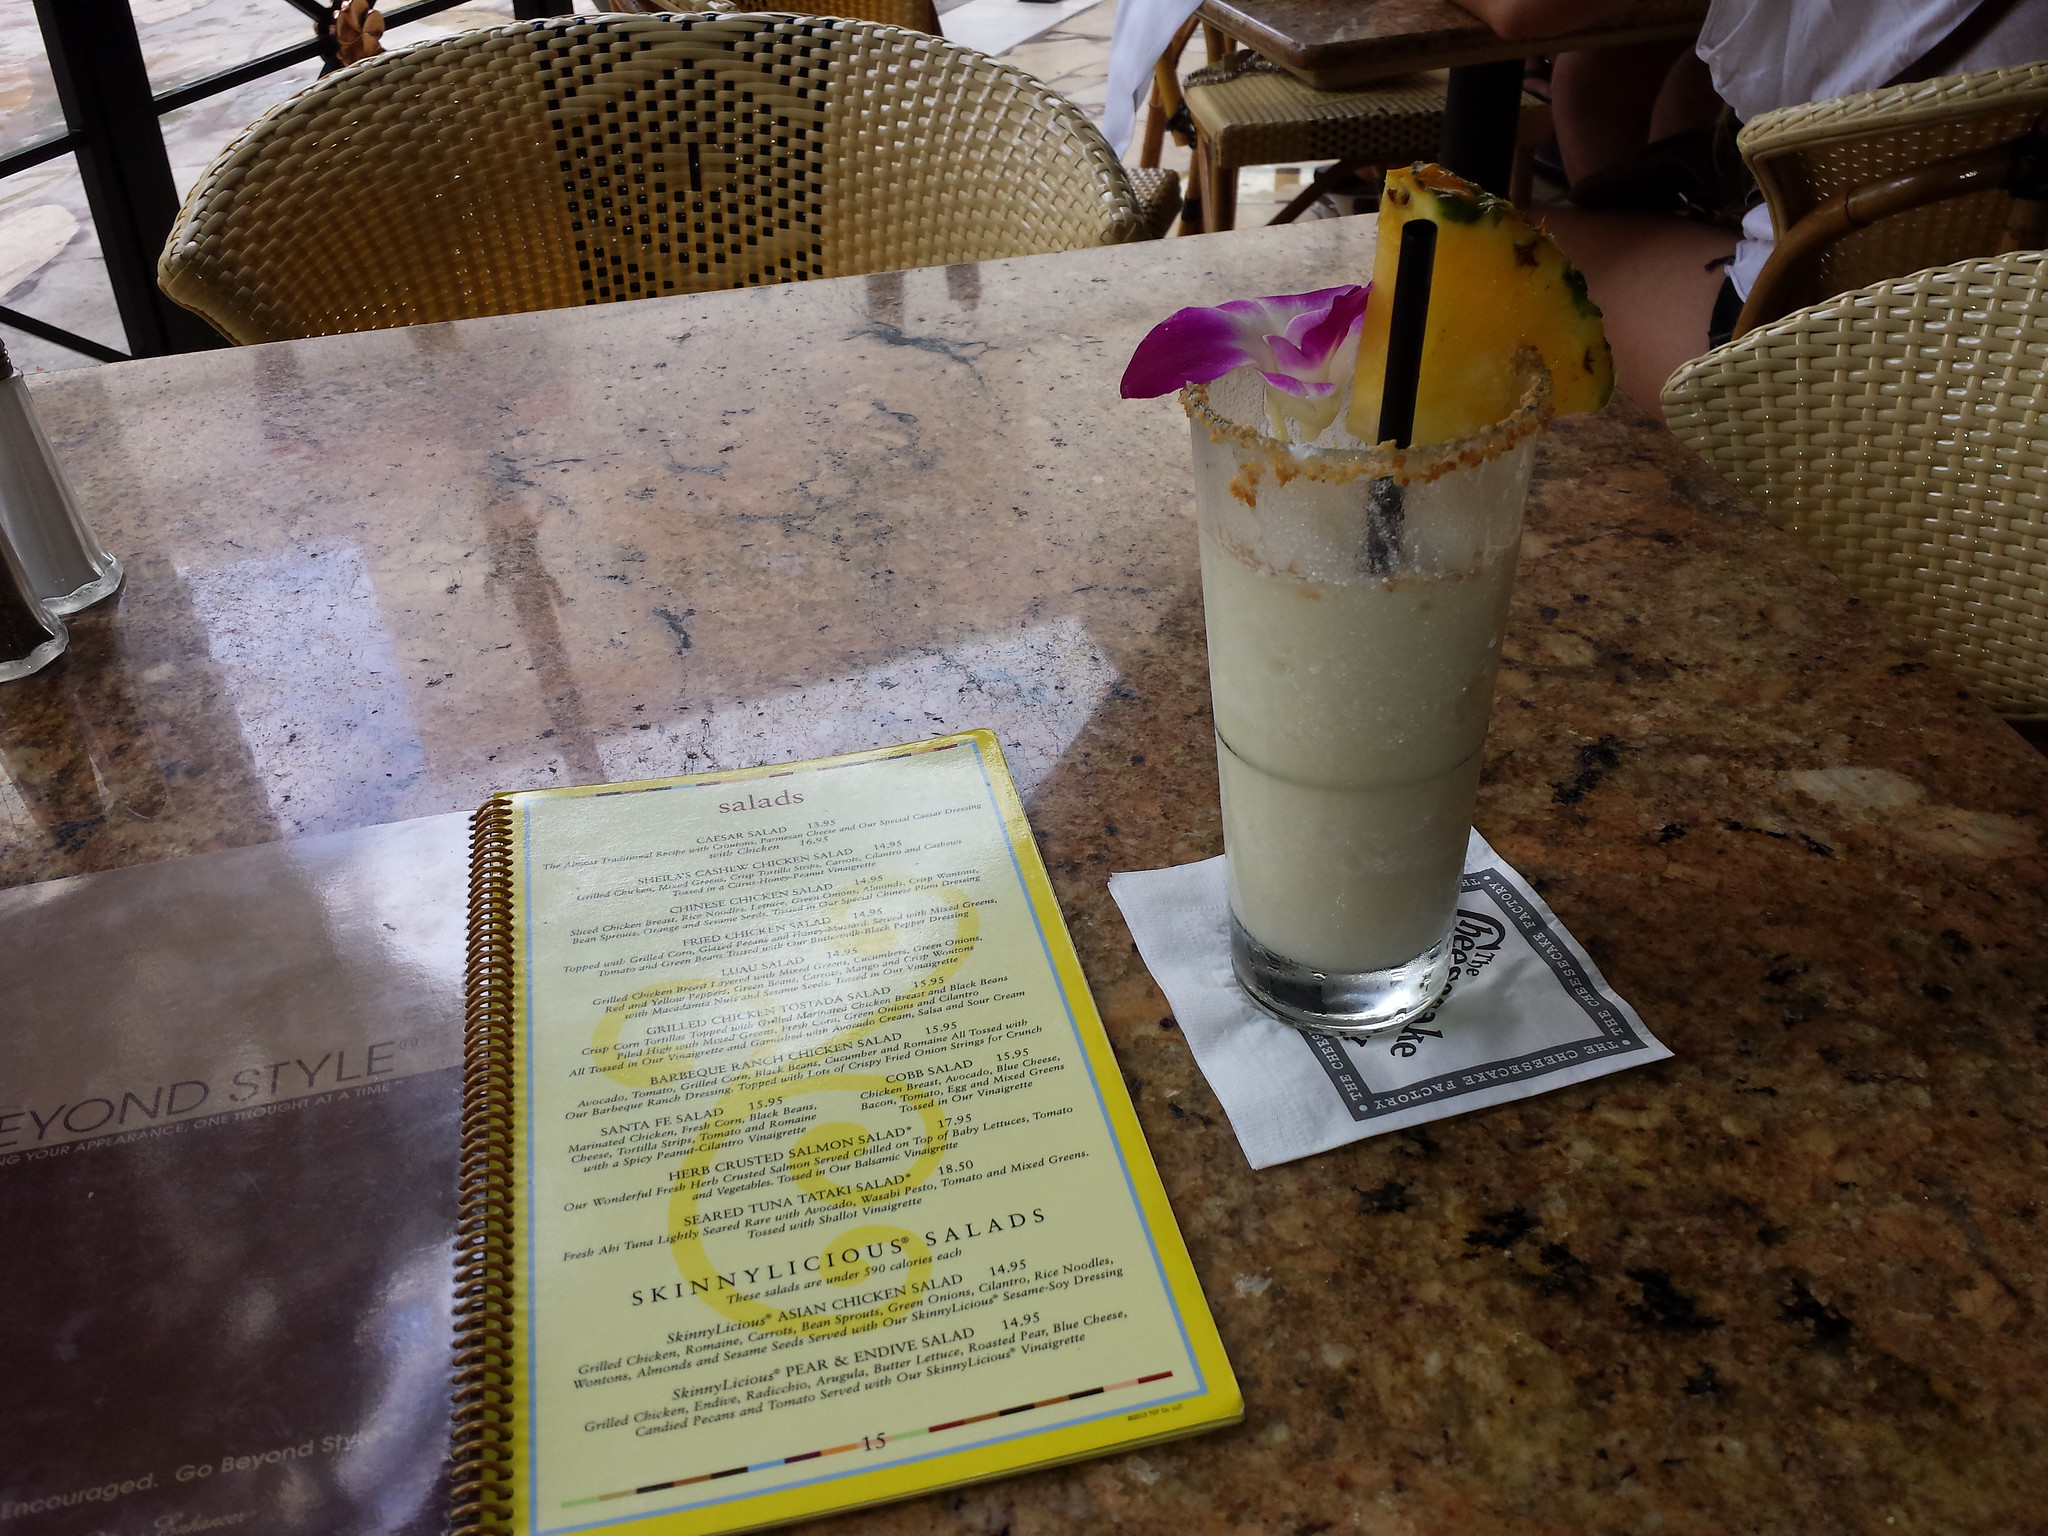 At The Cheesecake Factory for a pina colada